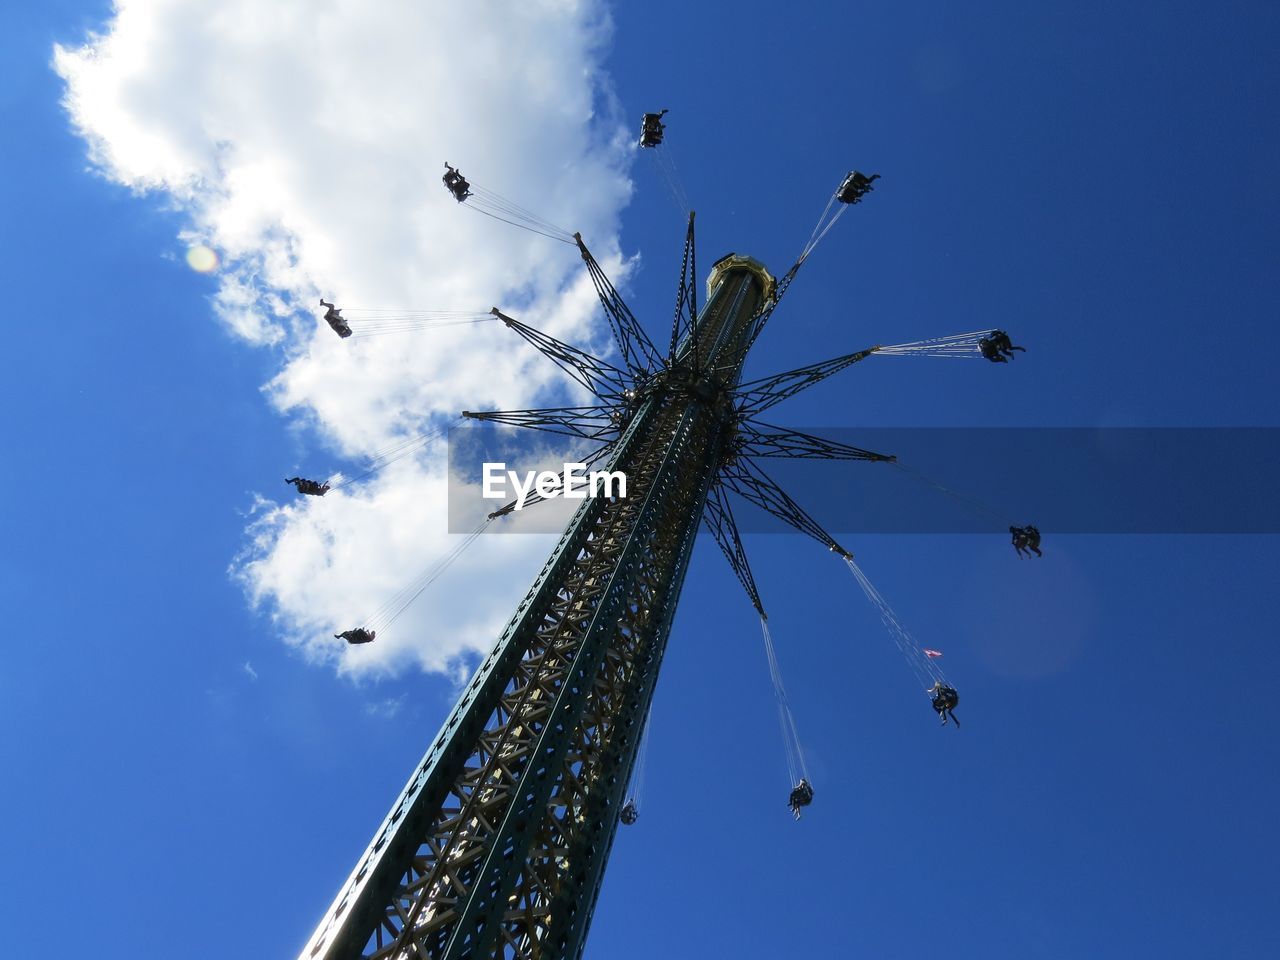 LOW ANGLE VIEW OF CHAIN RIDE AGAINST SKY